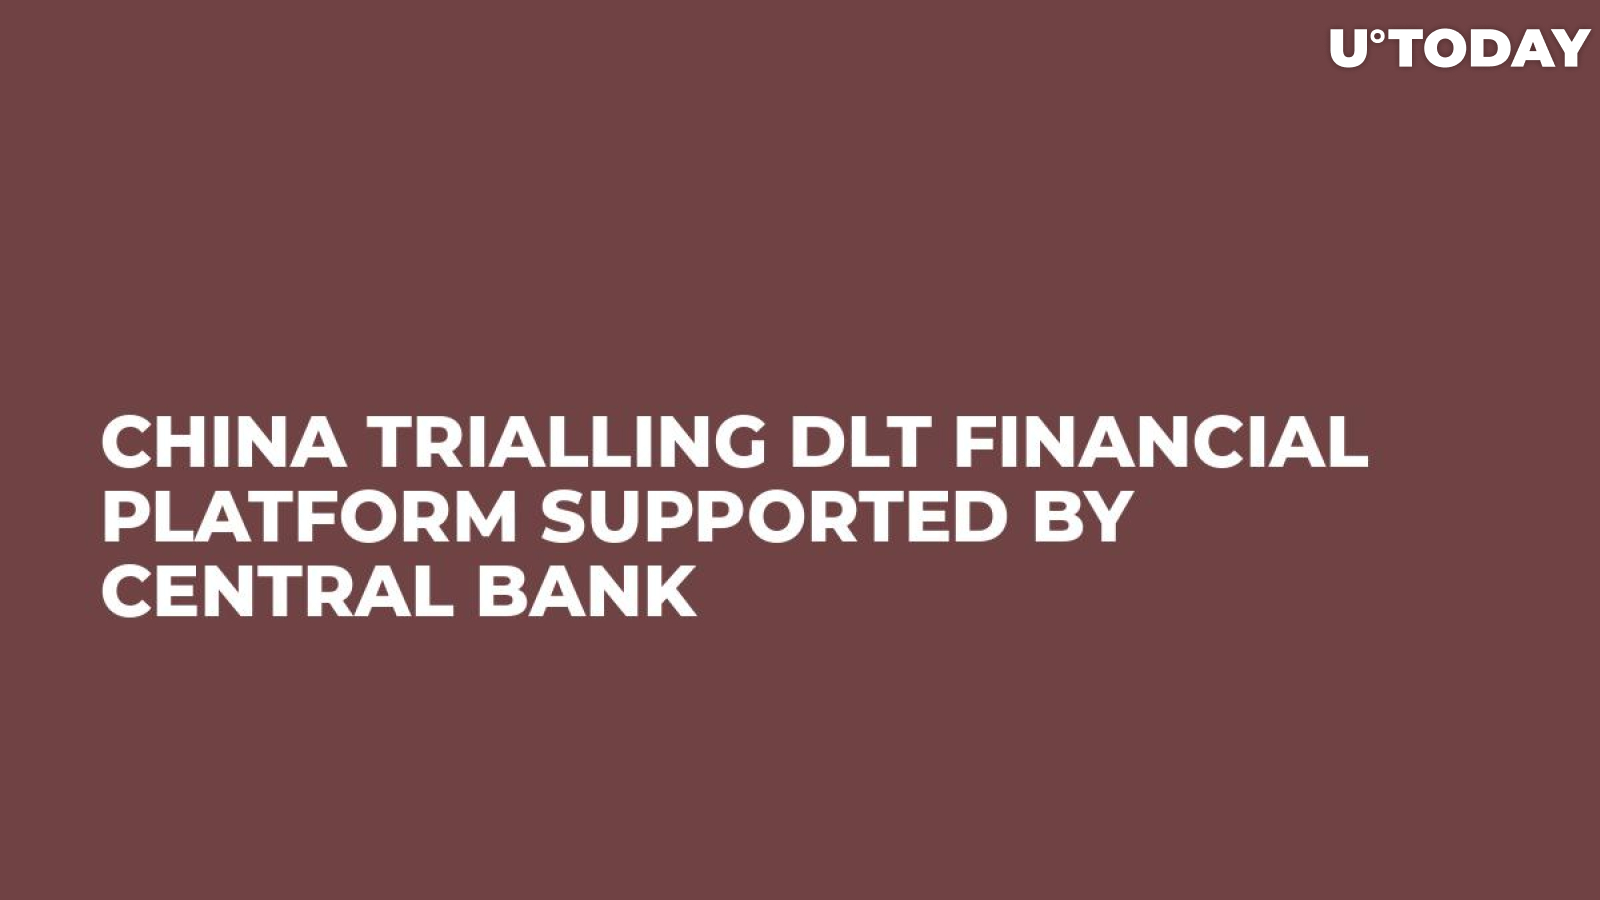 China Trialling DLT Financial Platform Supported by Central Bank